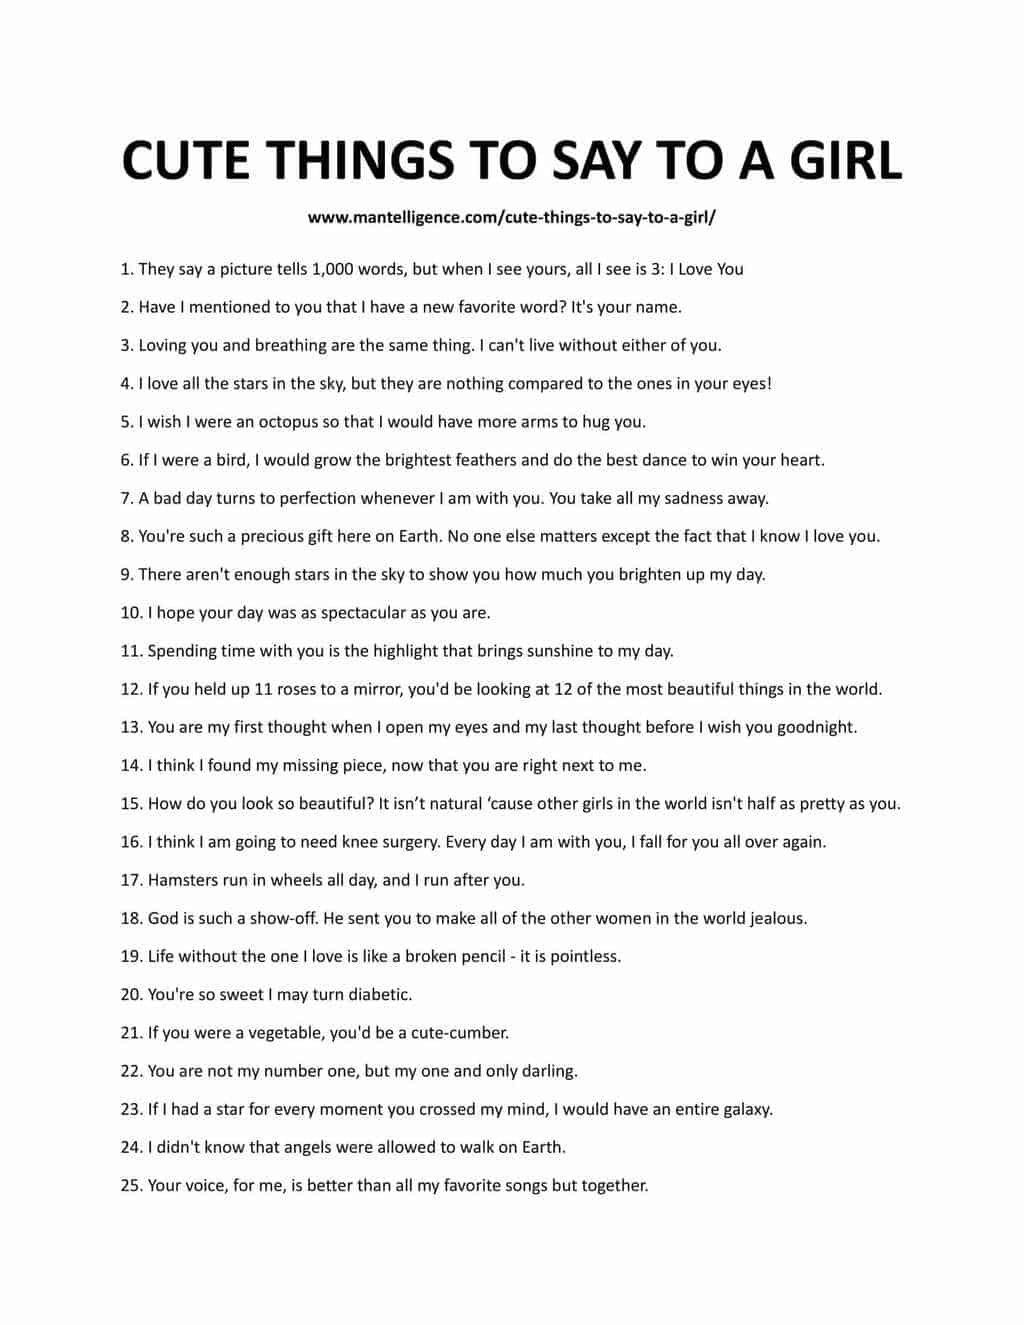 Top 10 sweet things to tell a girl